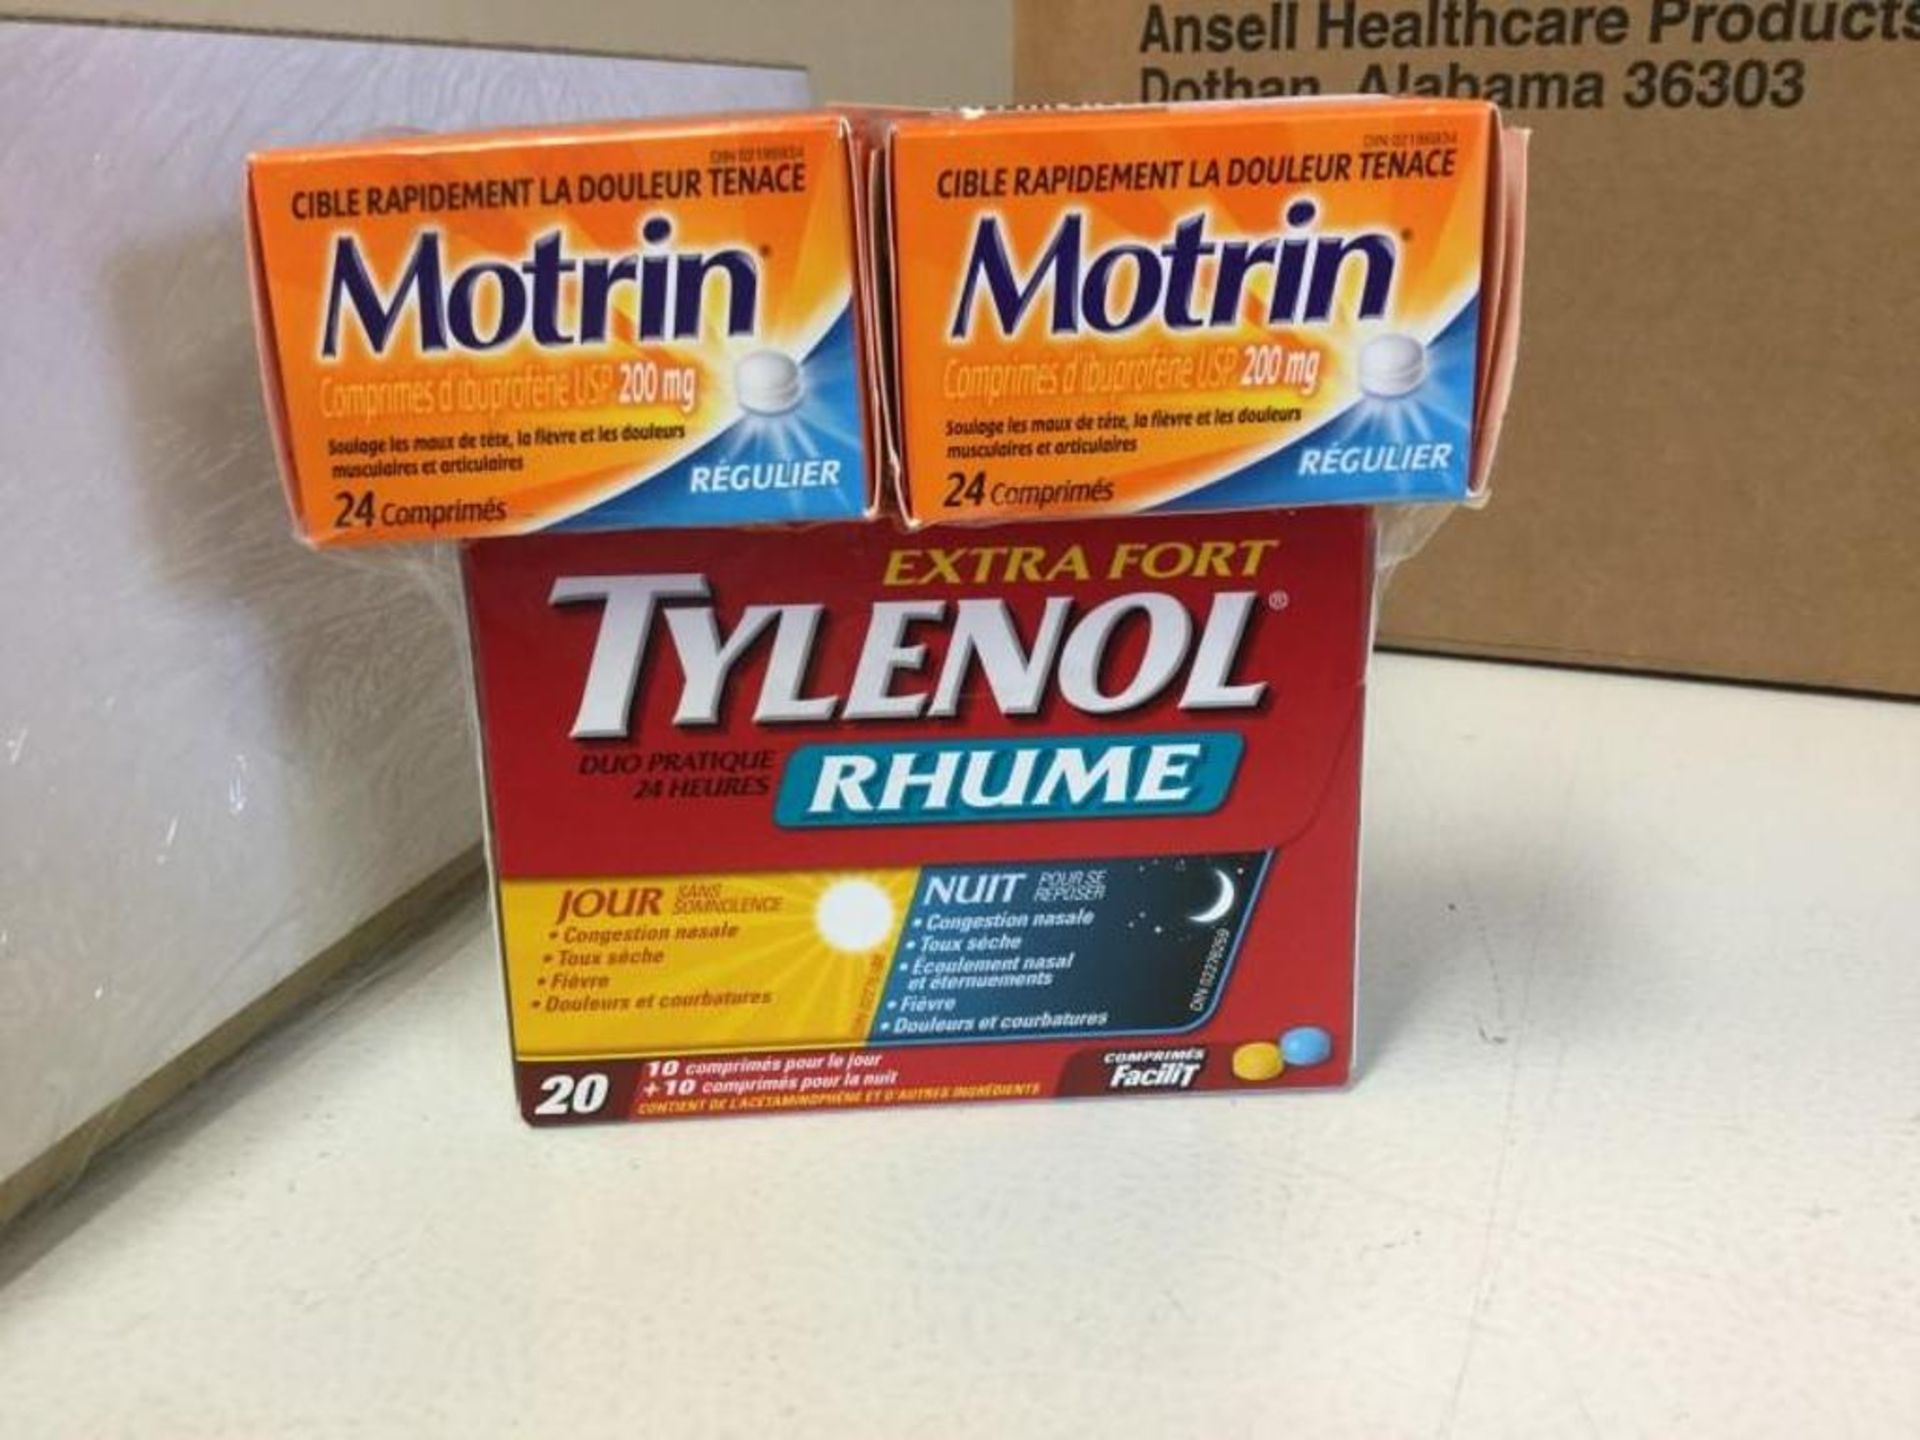 Lot of 3 - 2x Motrin 24 caplets bottles and 1 box of 20 tablets Tylenol 24 hour cold